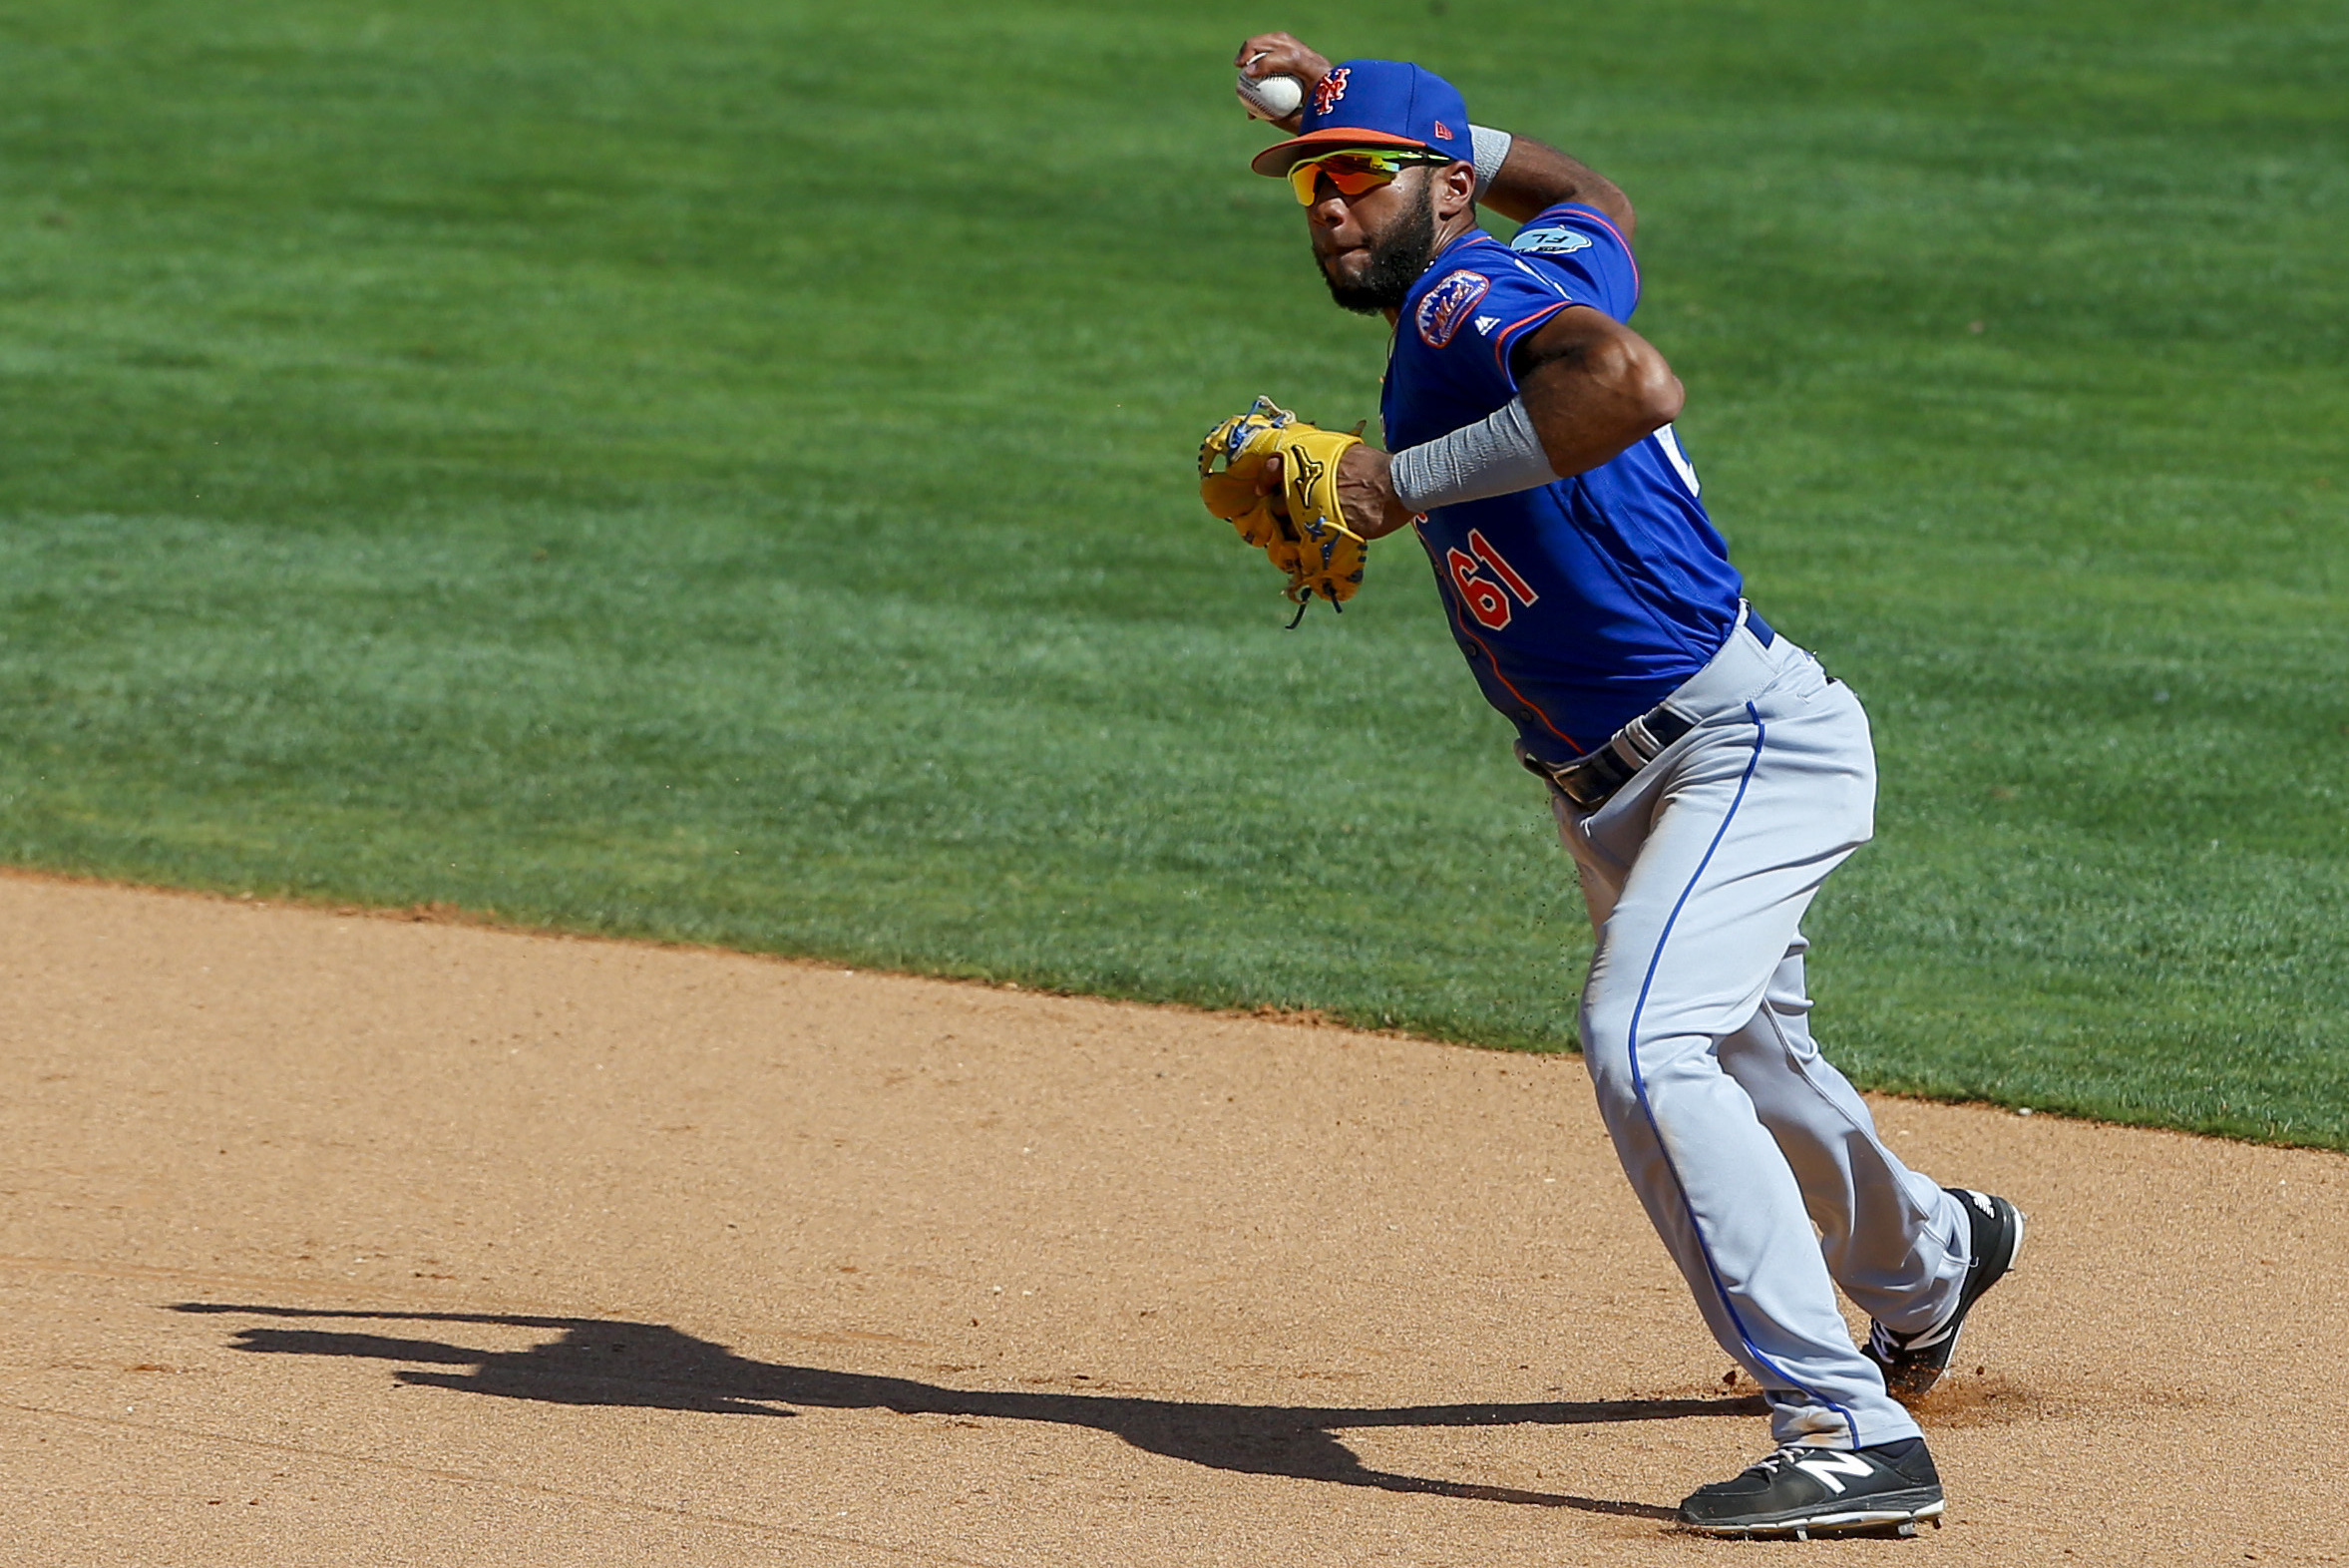 Amed Rosario wants Jose Reyes back with New York Mets